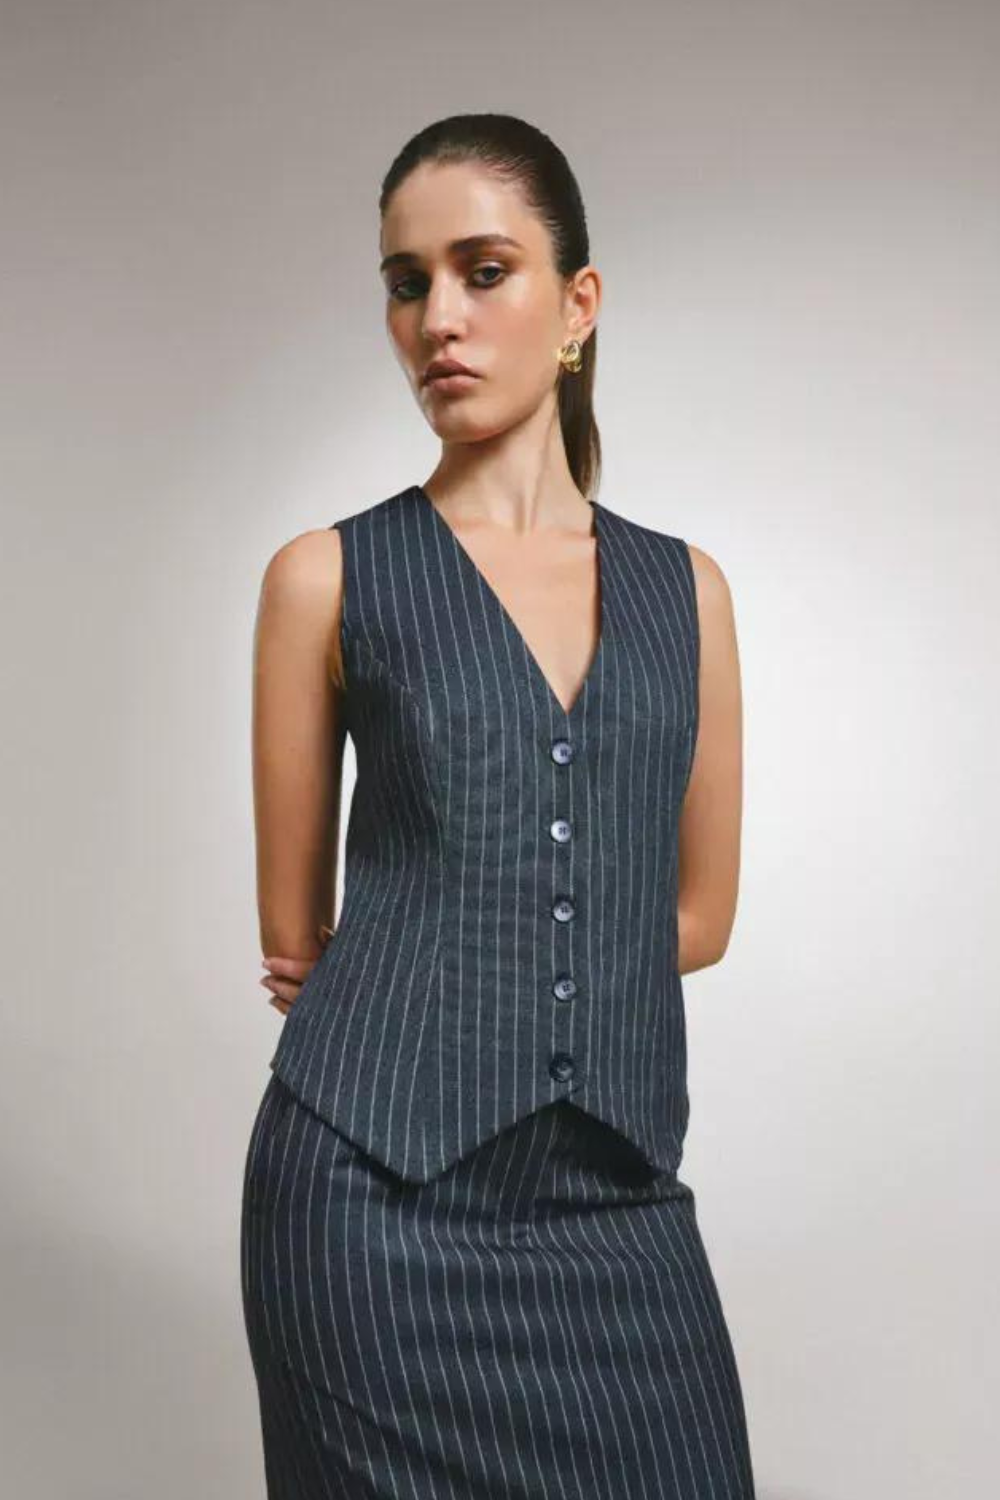 Vest made of textile material in stripes (MYxMY) 34323